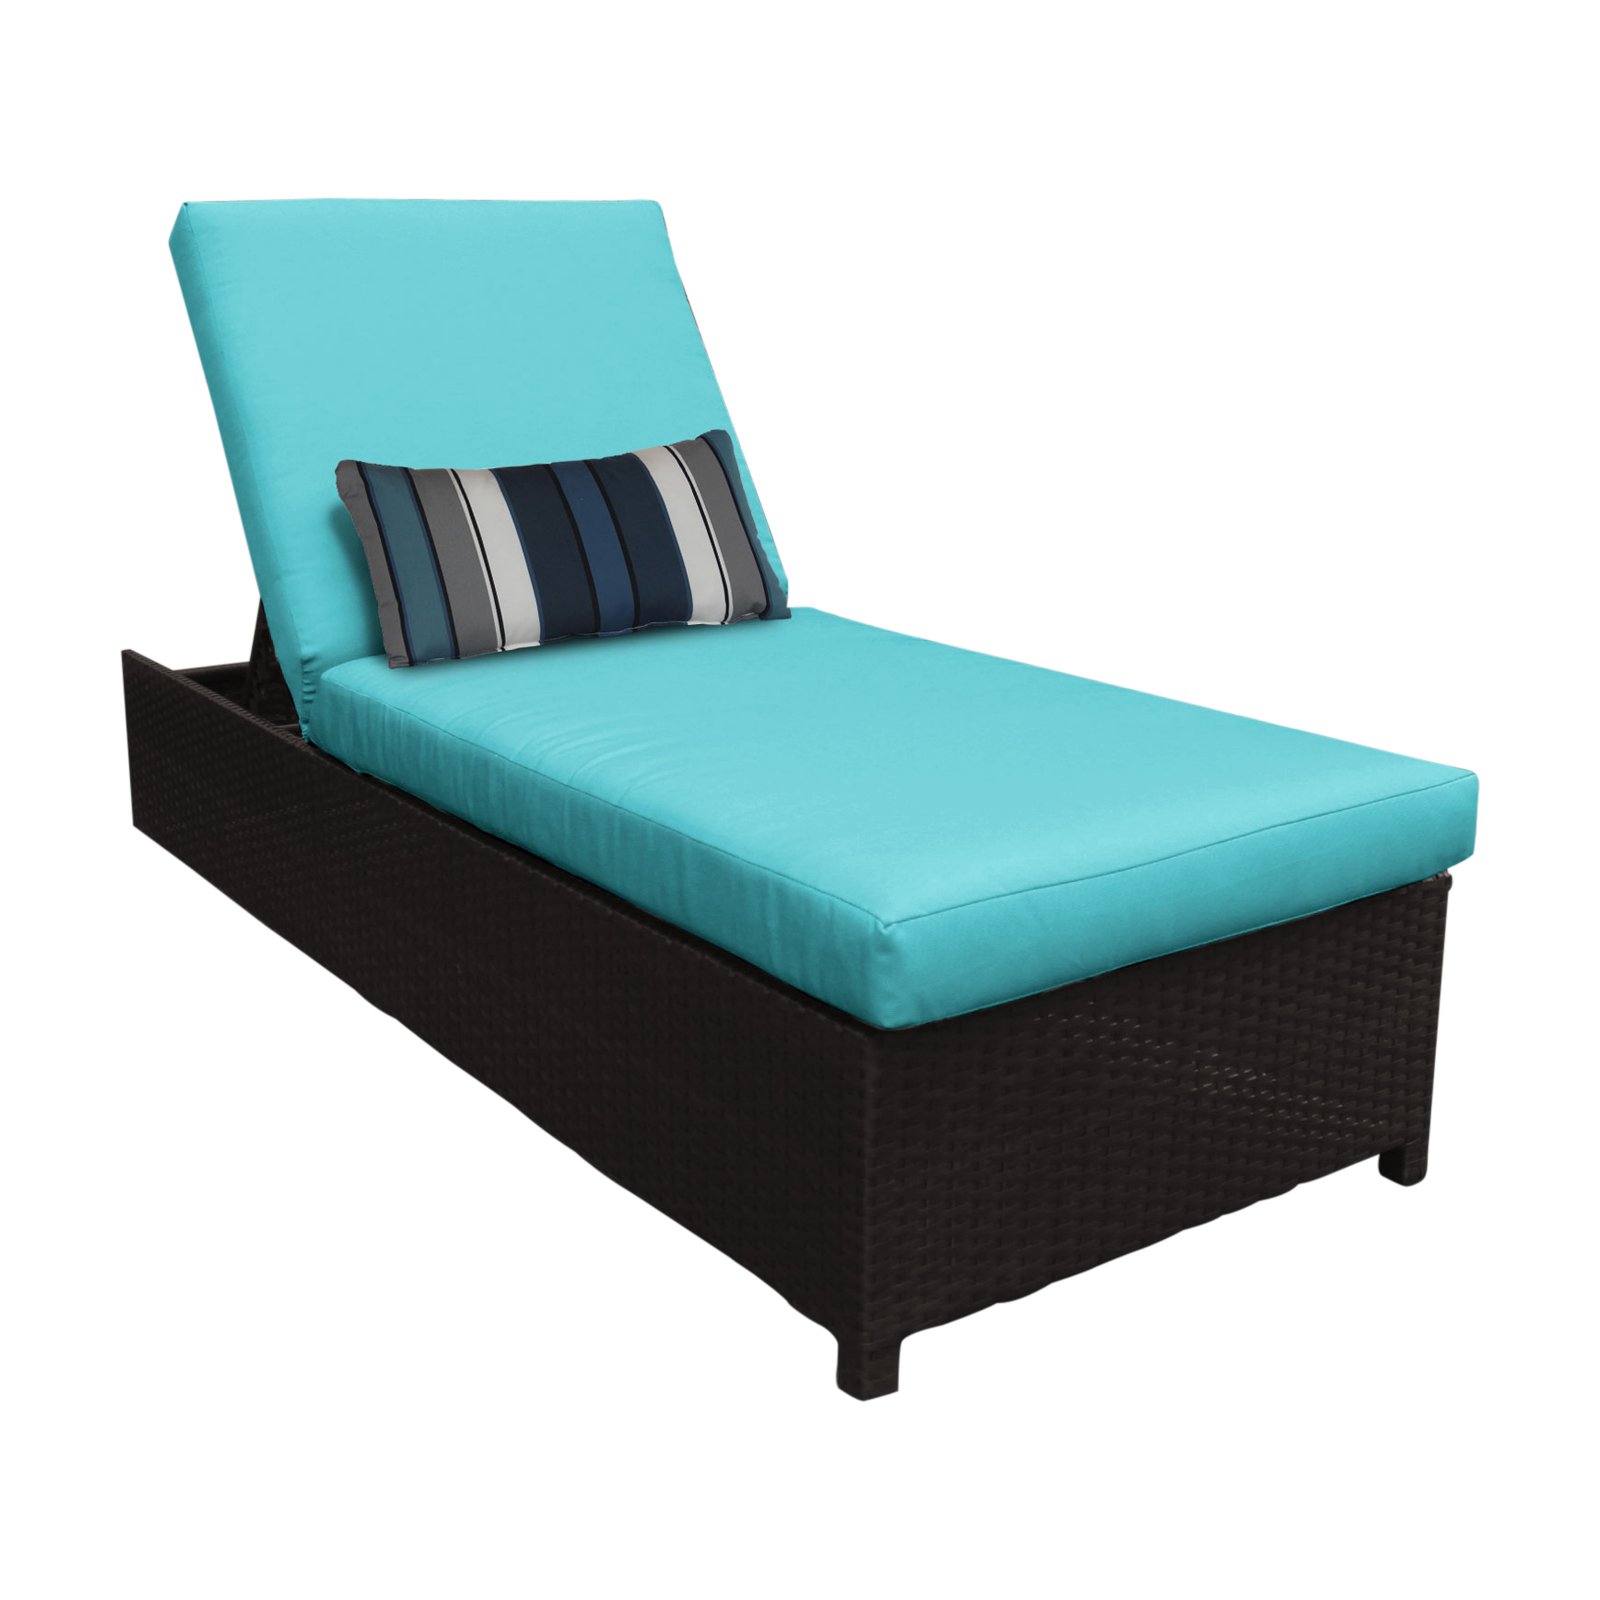 TK Classics Barbados Wheeled Wicker Outdoor Chaise Lounge Chair - image 2 of 11